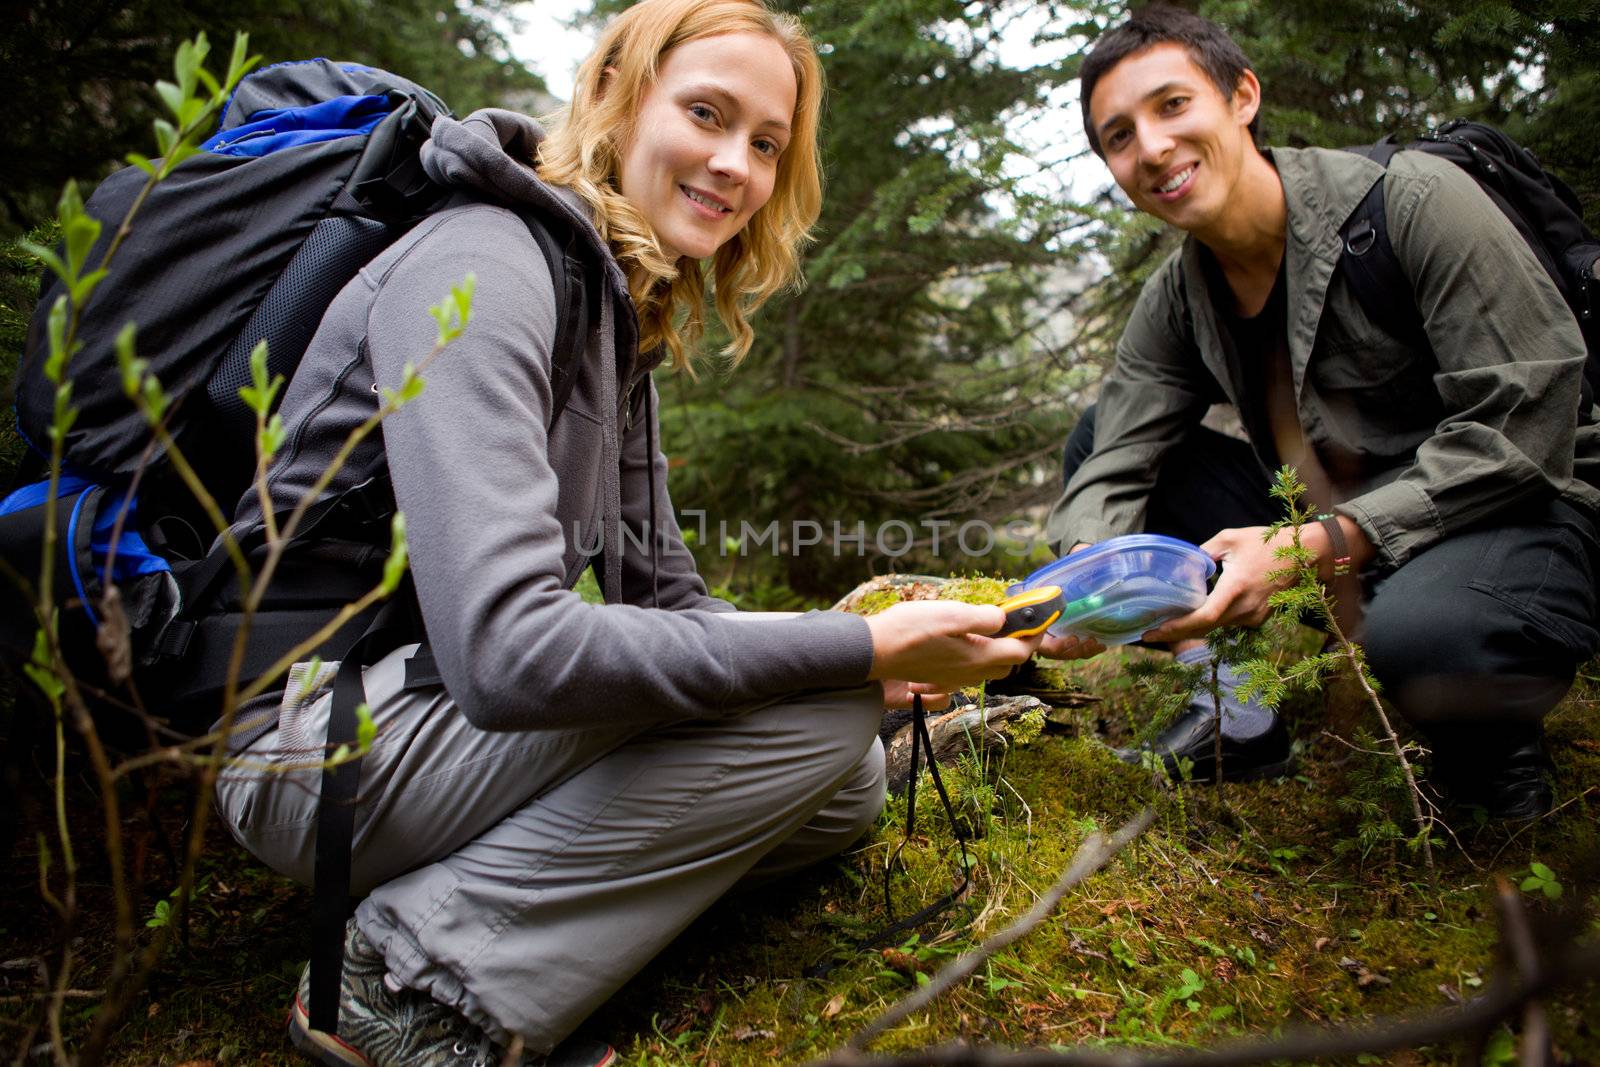 Two people finding a geocache in the forest.  Shallow depth of field with sharp focus on woman.